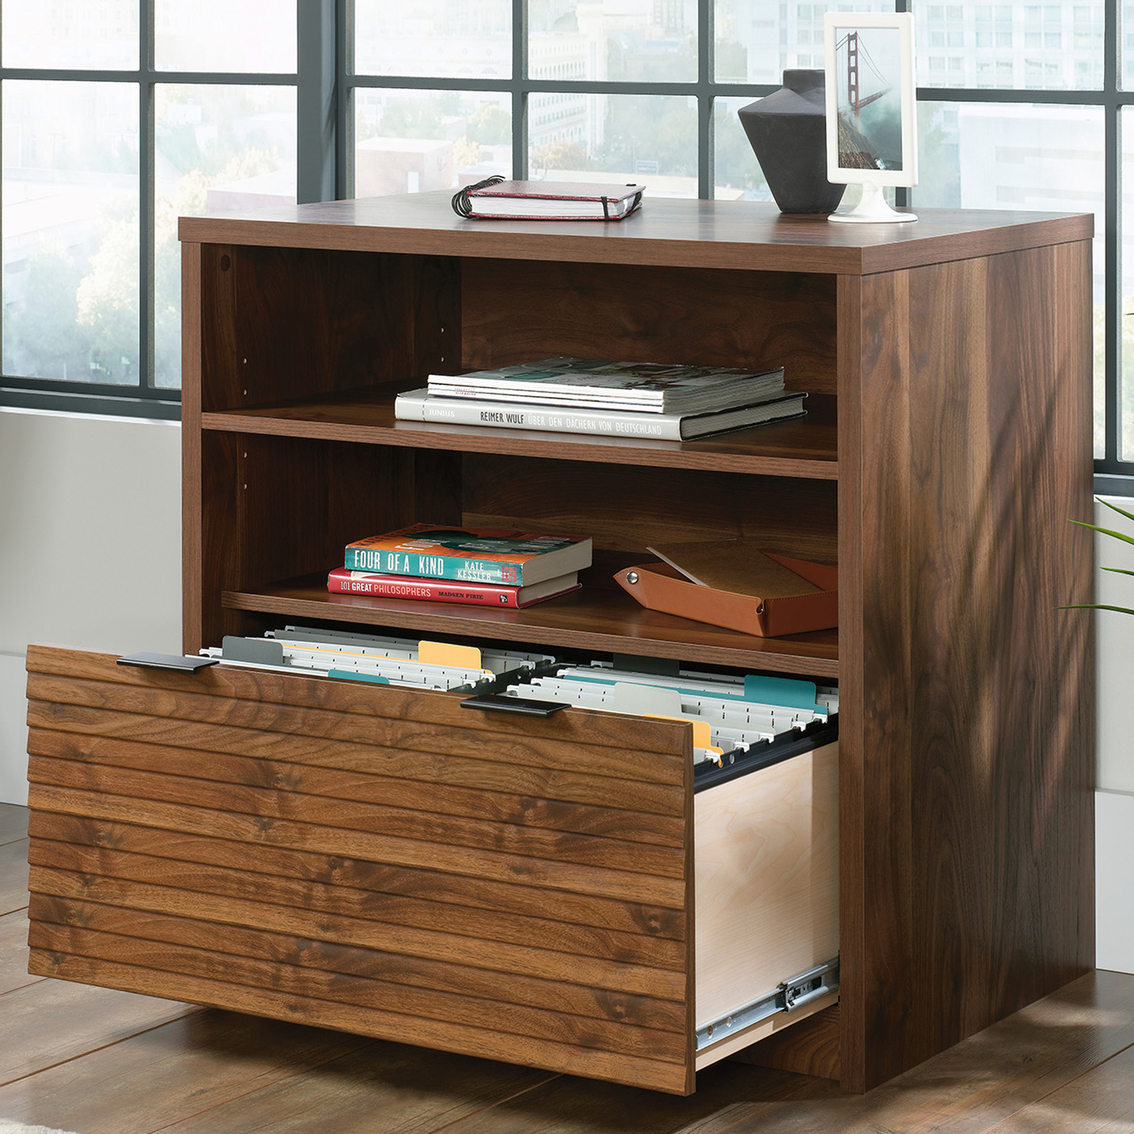 Sauder Lateral Filing Cabinet with Open Shelf - Image 2 of 9